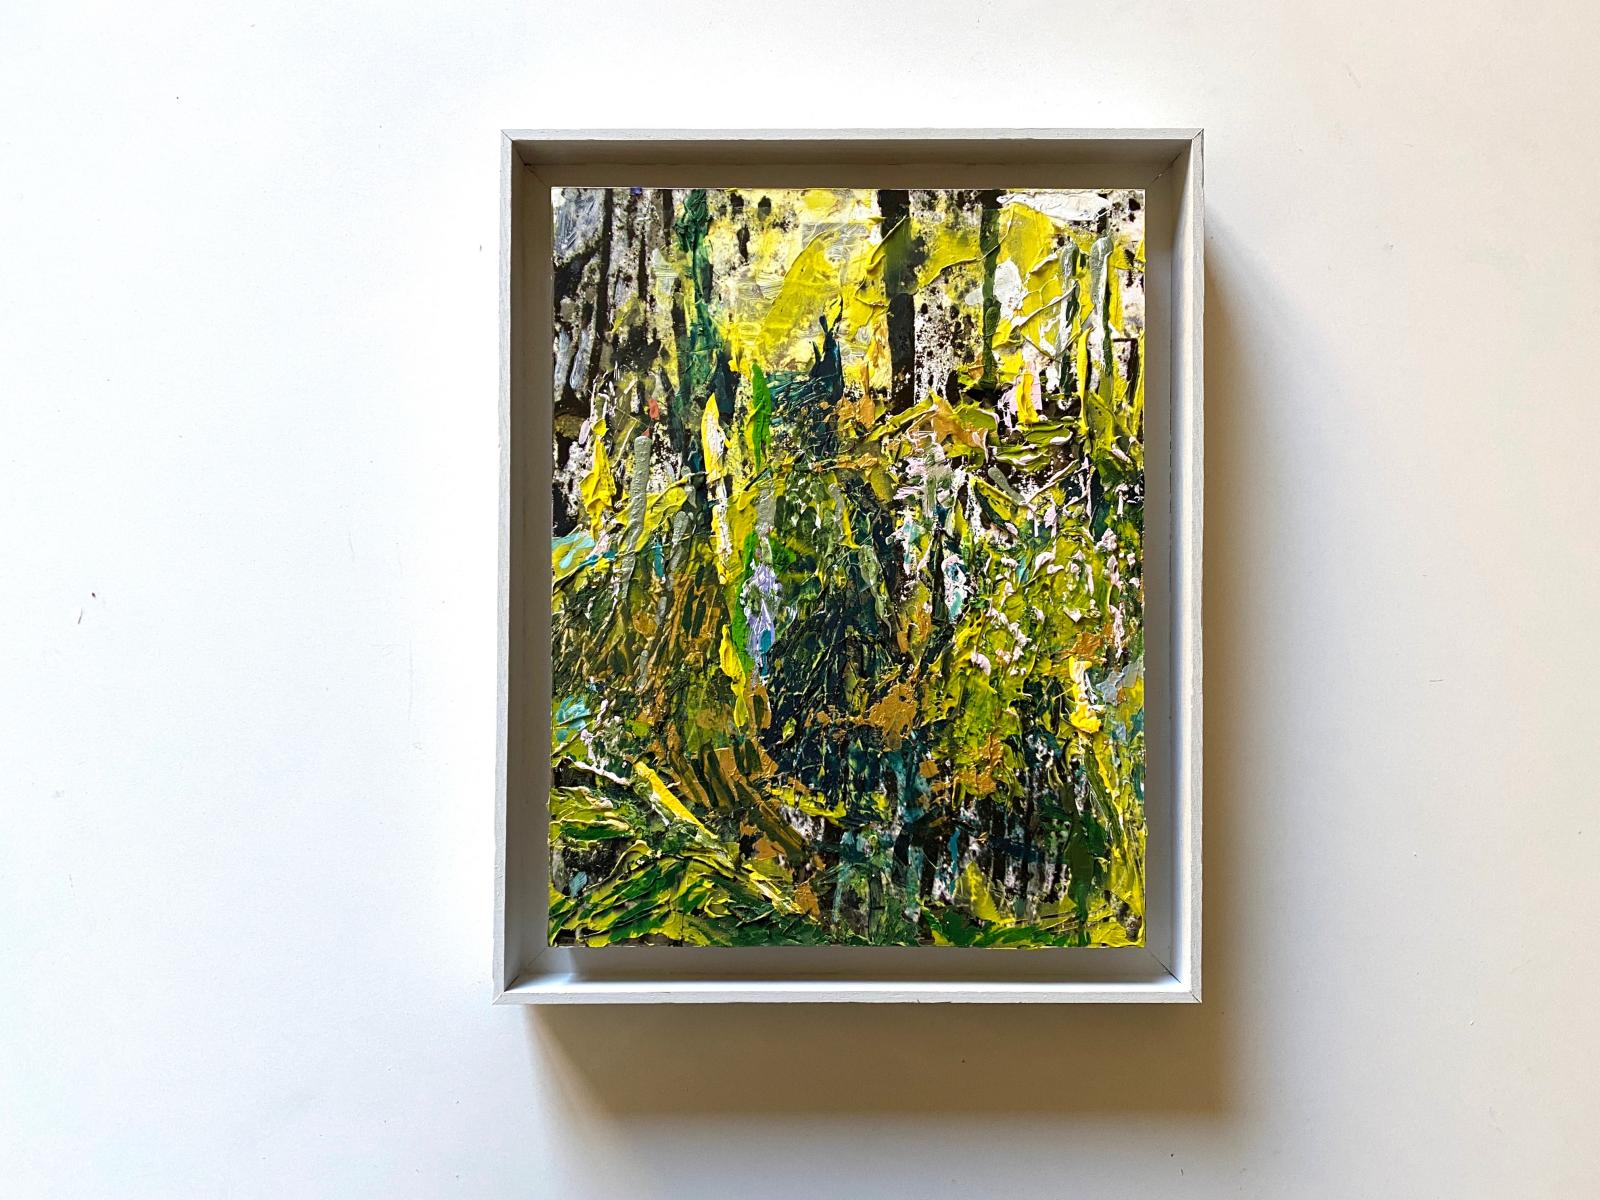 ORIGINS | "Evergreen" | Scale view with artist's frame